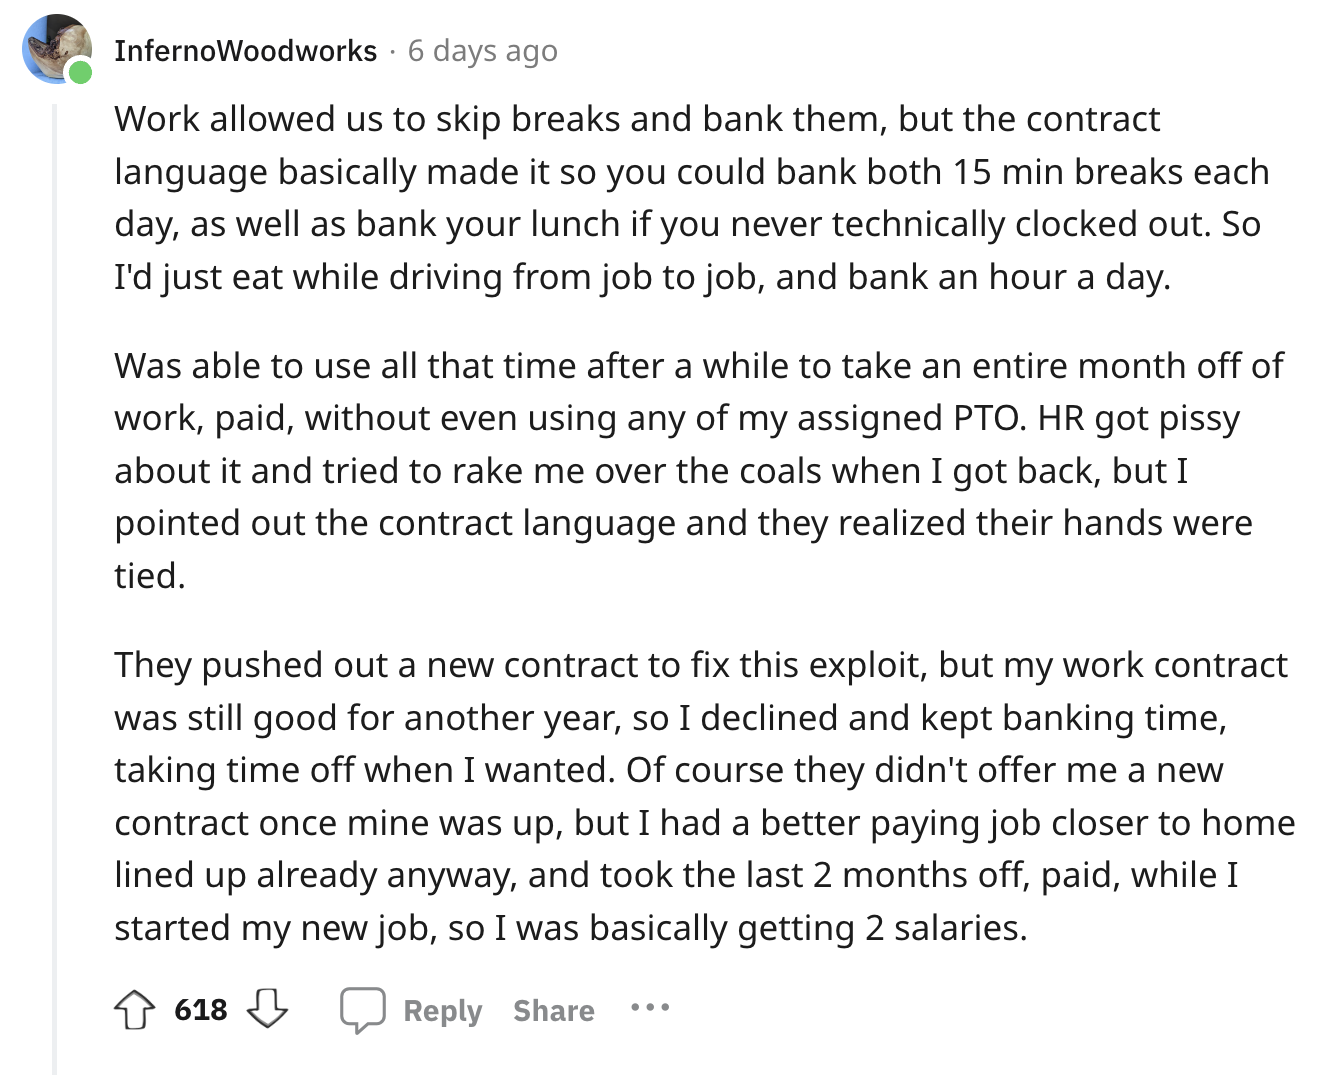 angle - InfernoWoodworks 6 days ago Work allowed us to skip breaks and bank them, but the contract language basically made it so you could bank both 15 min breaks each day, as well as bank your lunch if you never technically clocked out. So I'd just eat w